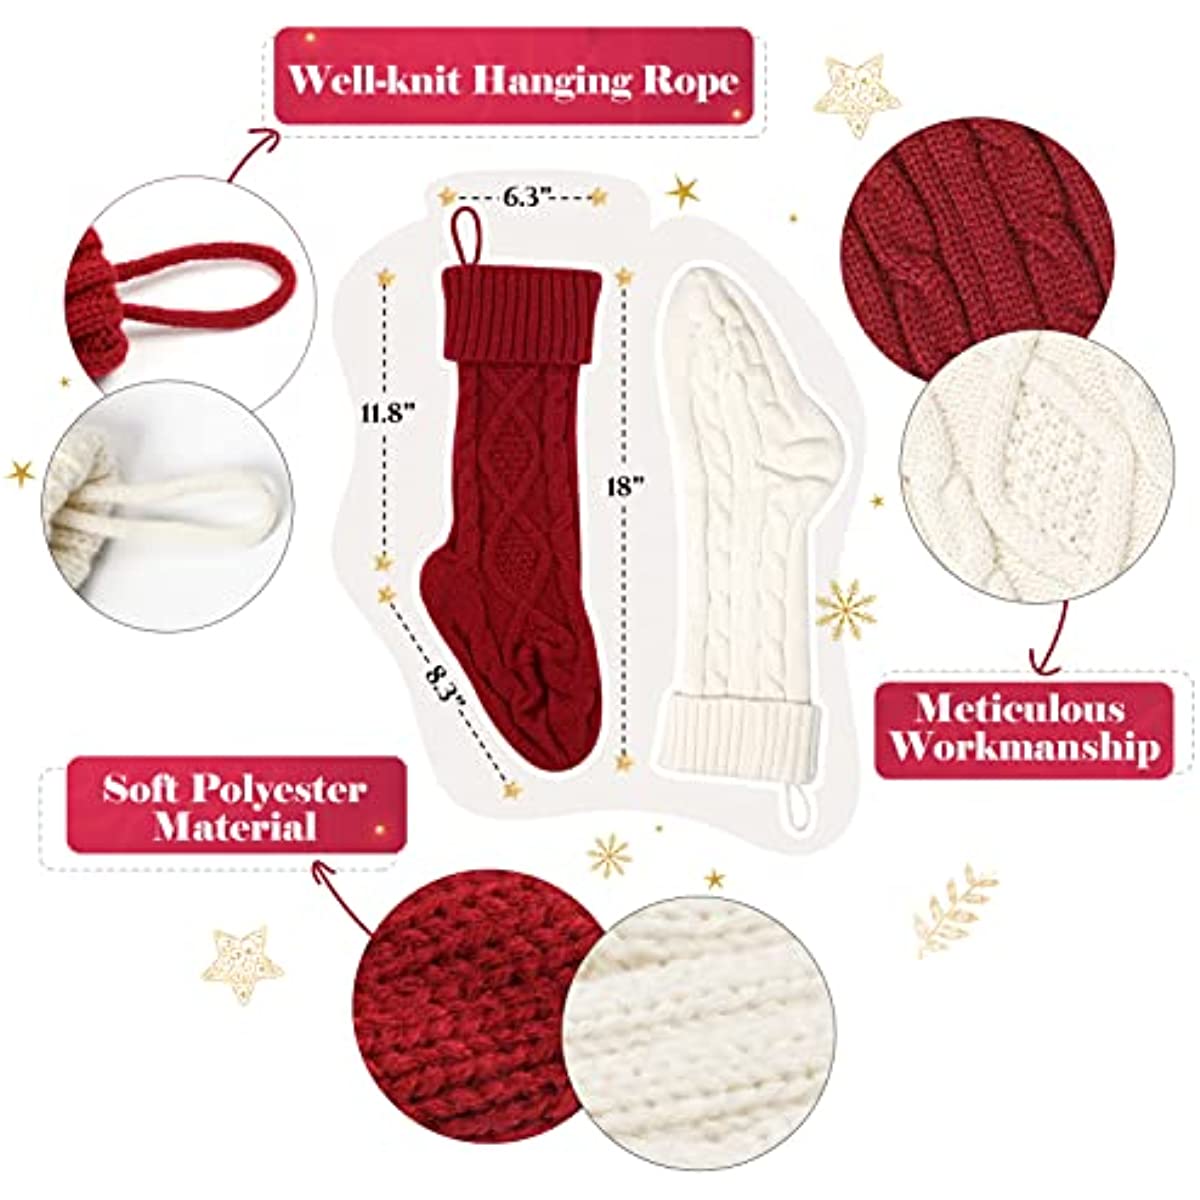 Christmas Stockings 4 Packs Large 18 Inches Classic Cable Knitted Ivory White Burgundy for Family Xmas Holiday Party Decoration